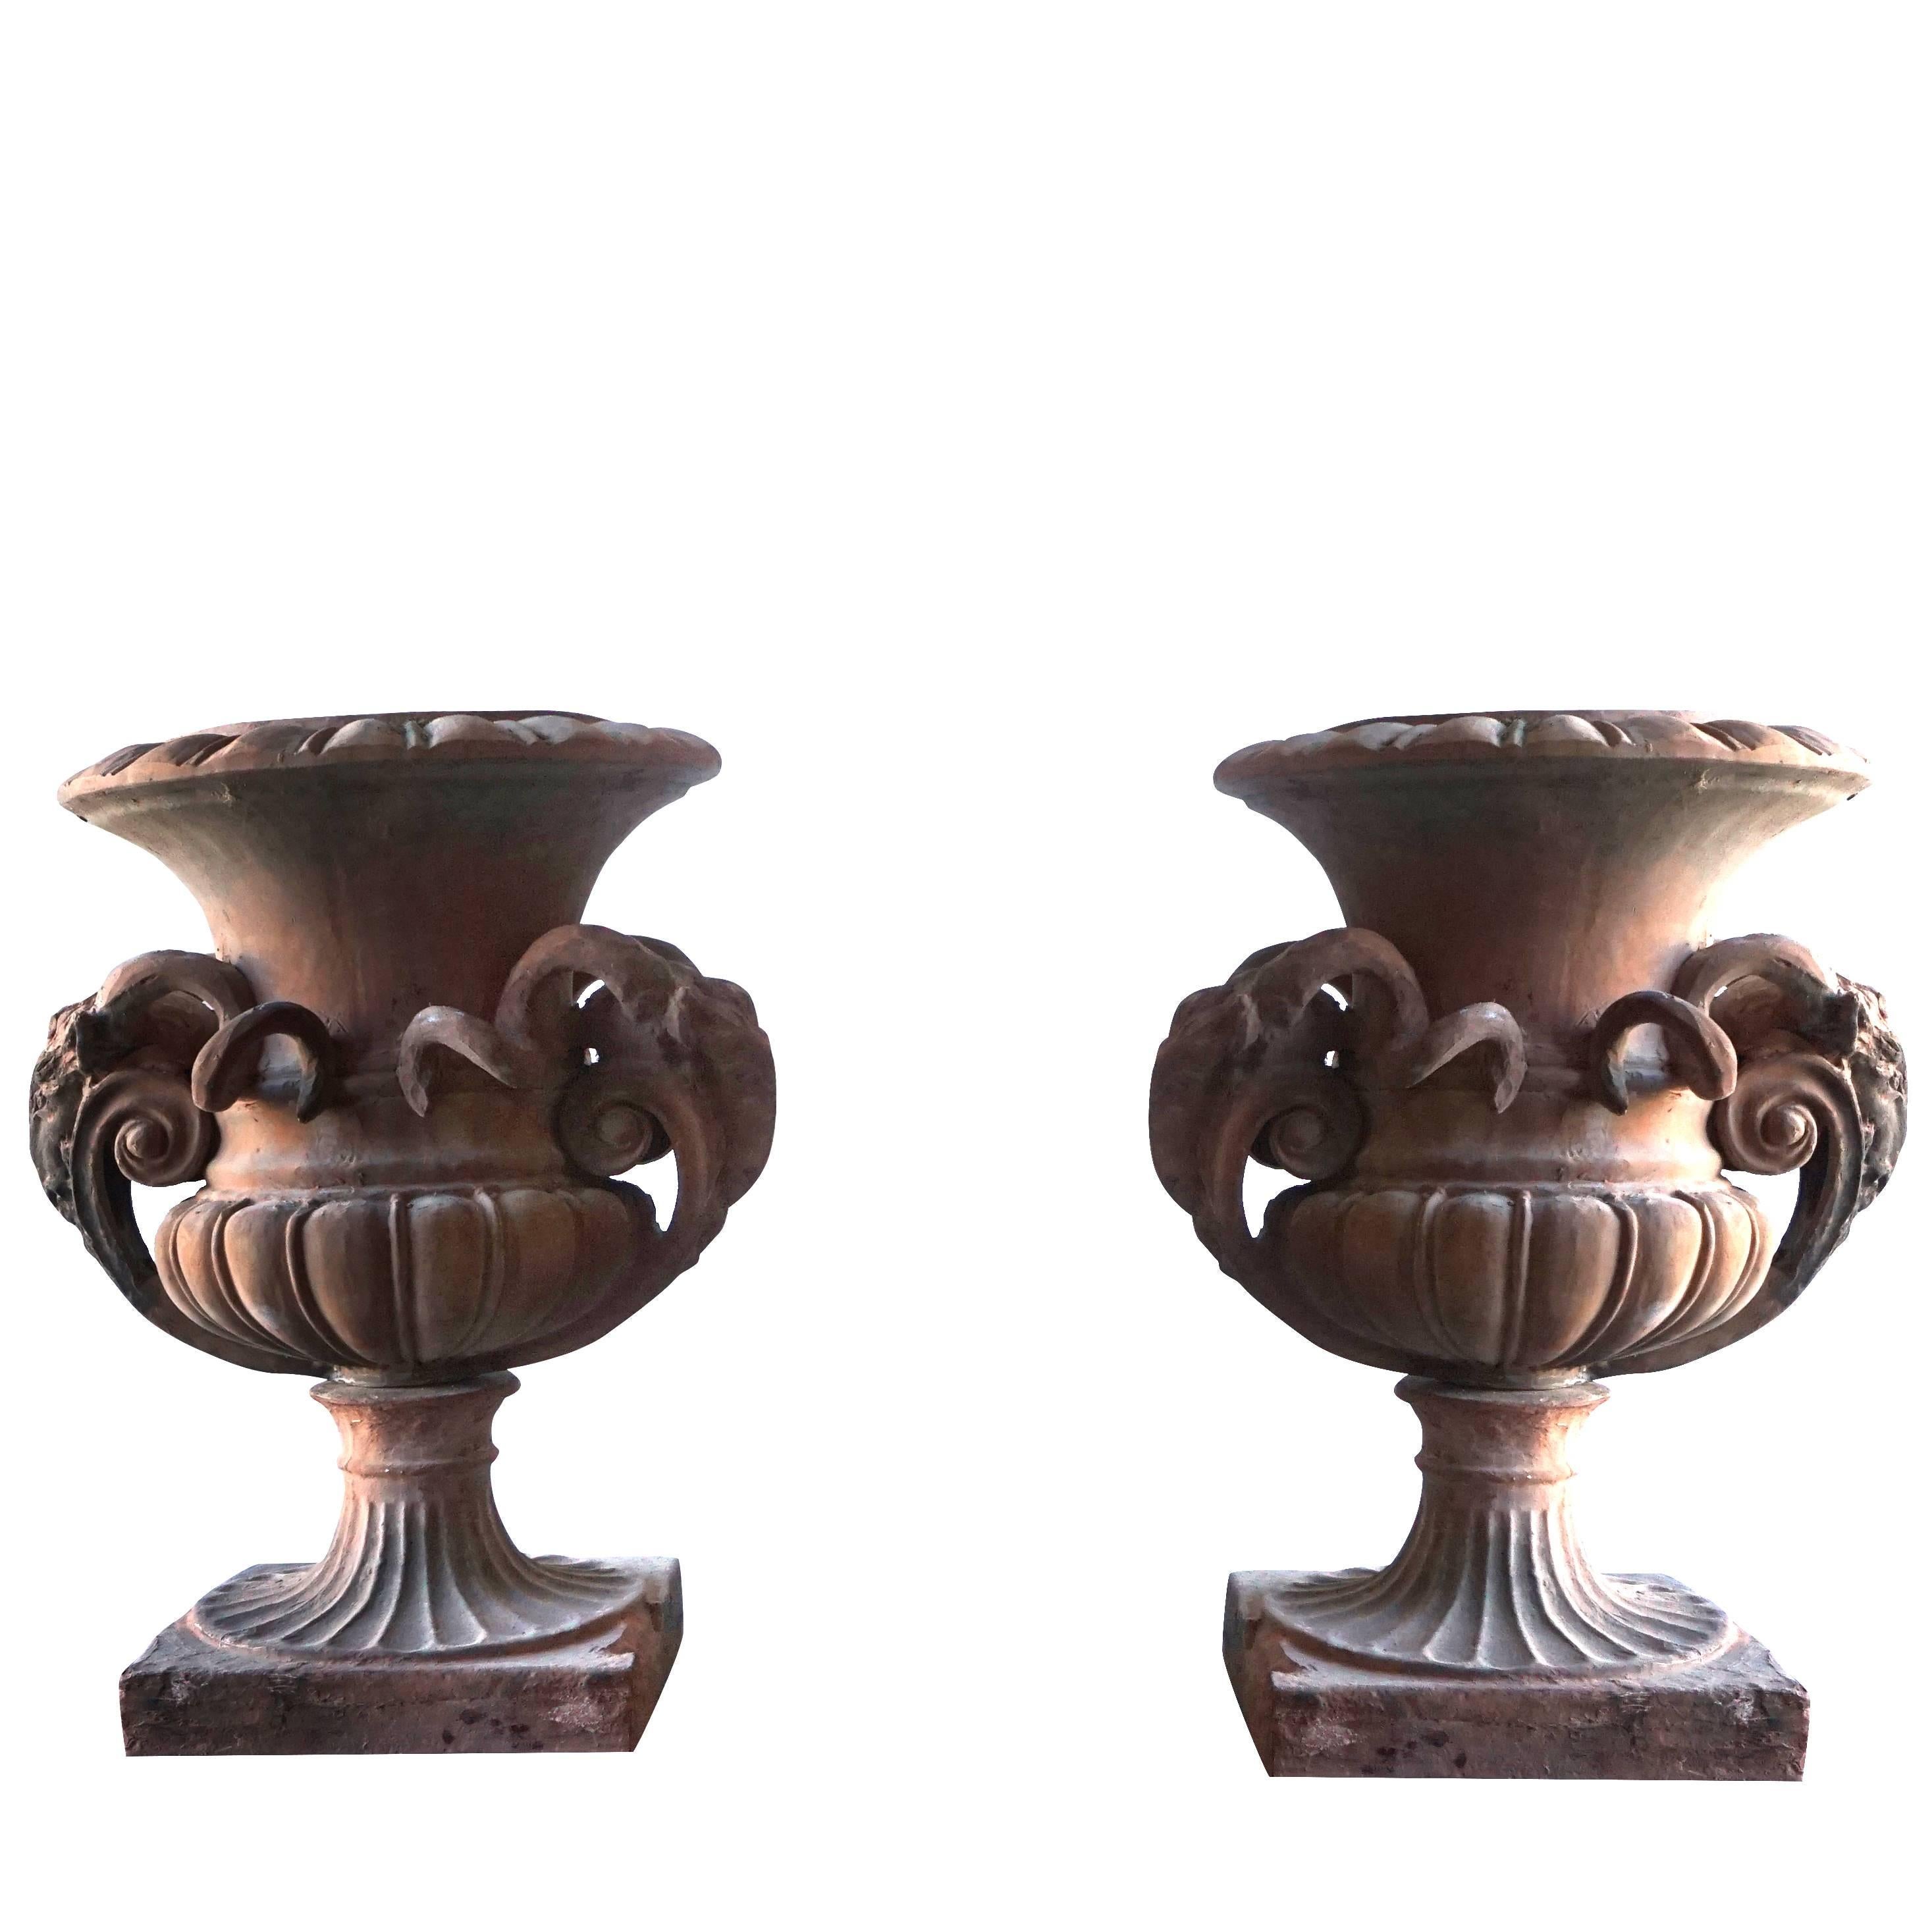 Late 19th Century Pair of Tuscan Neoclassical Style Urns in Terracotta